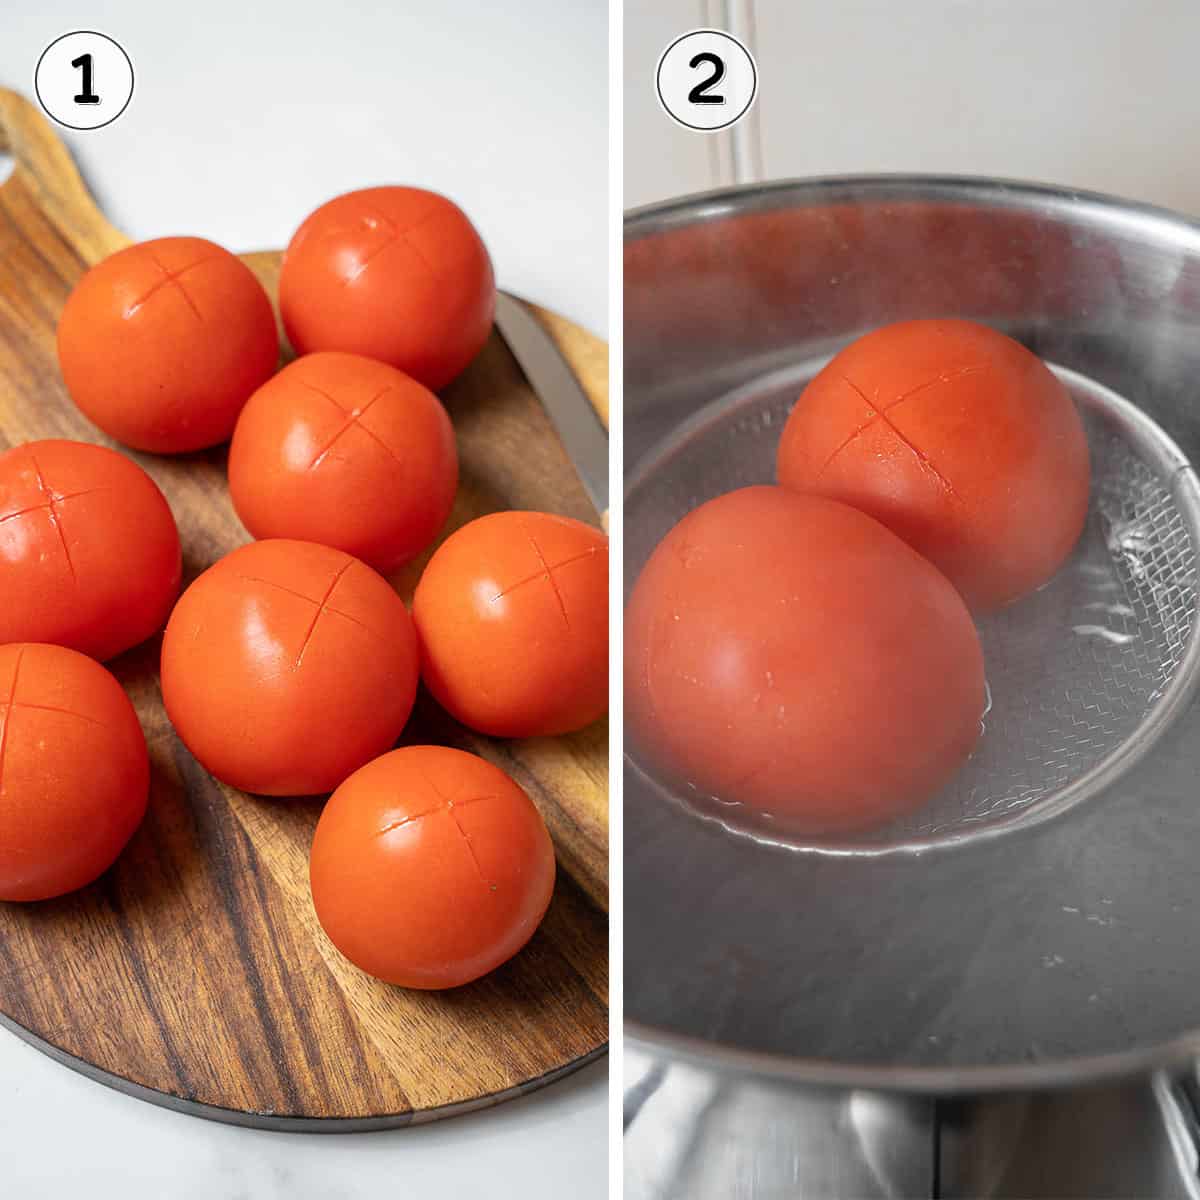 cutting an x on the skins of tomatoes and blanching them in boiling water.